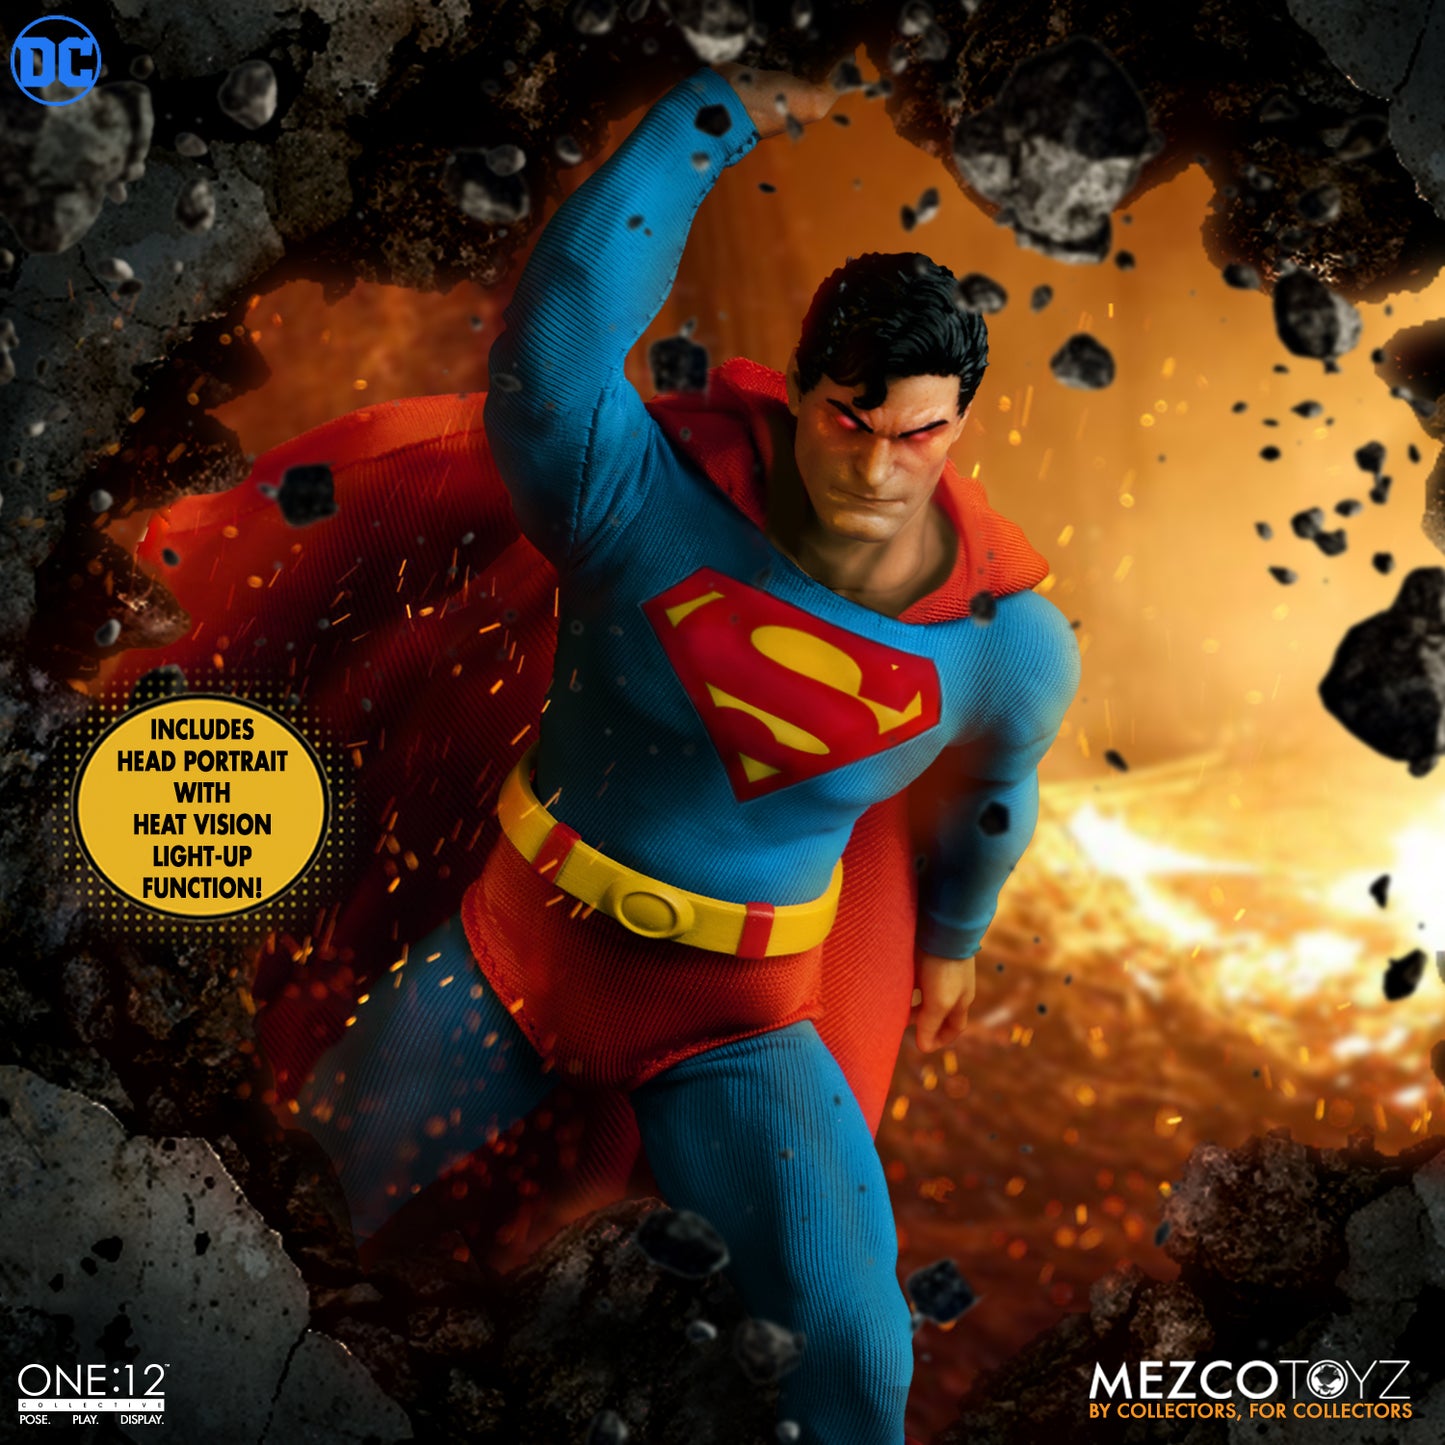 Superman Man of Steel edition One:12 Collective action figure